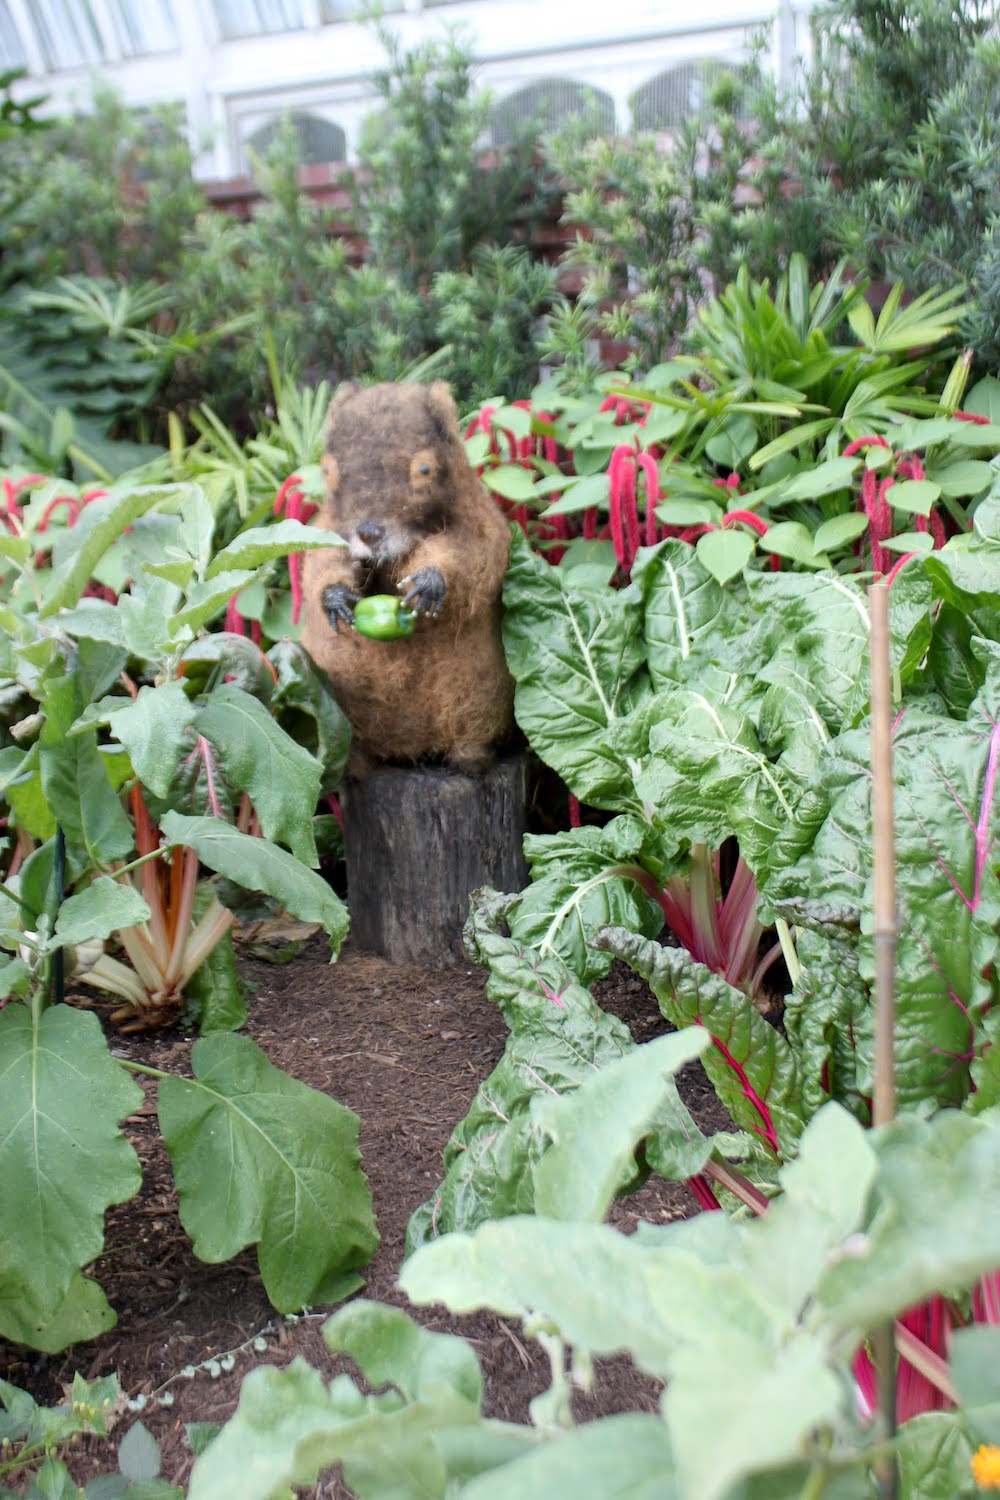 Giant rodent rampaging through the veggie patch